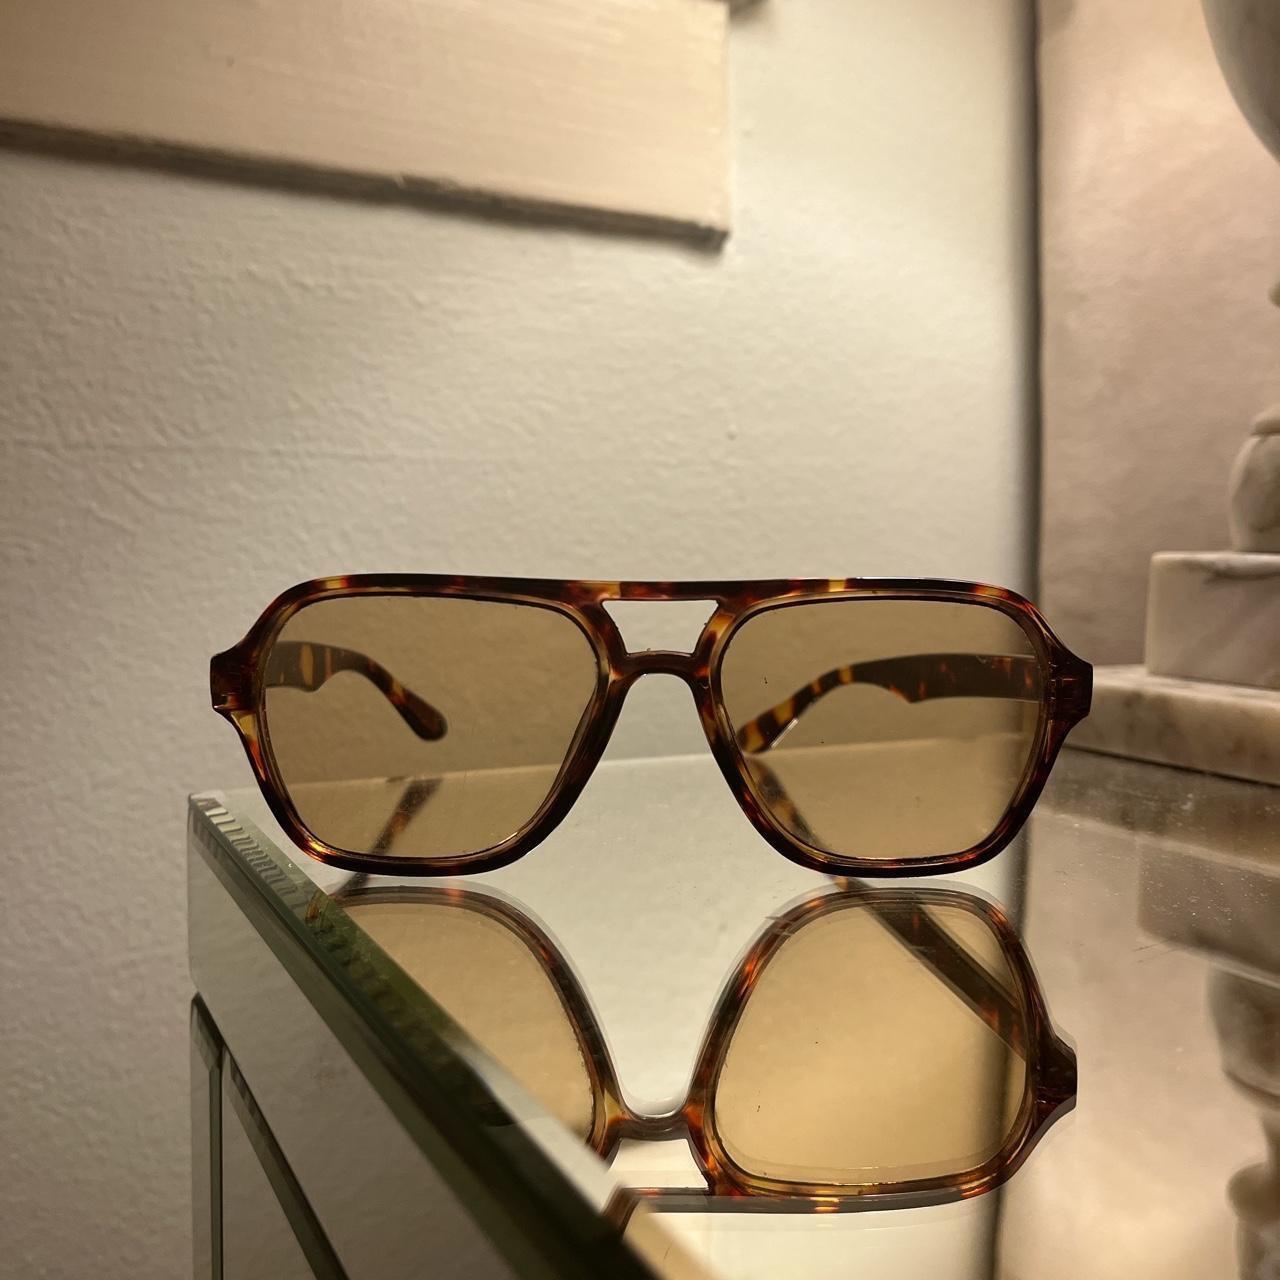 Urban Outfitters Women's Brown Sunglasses